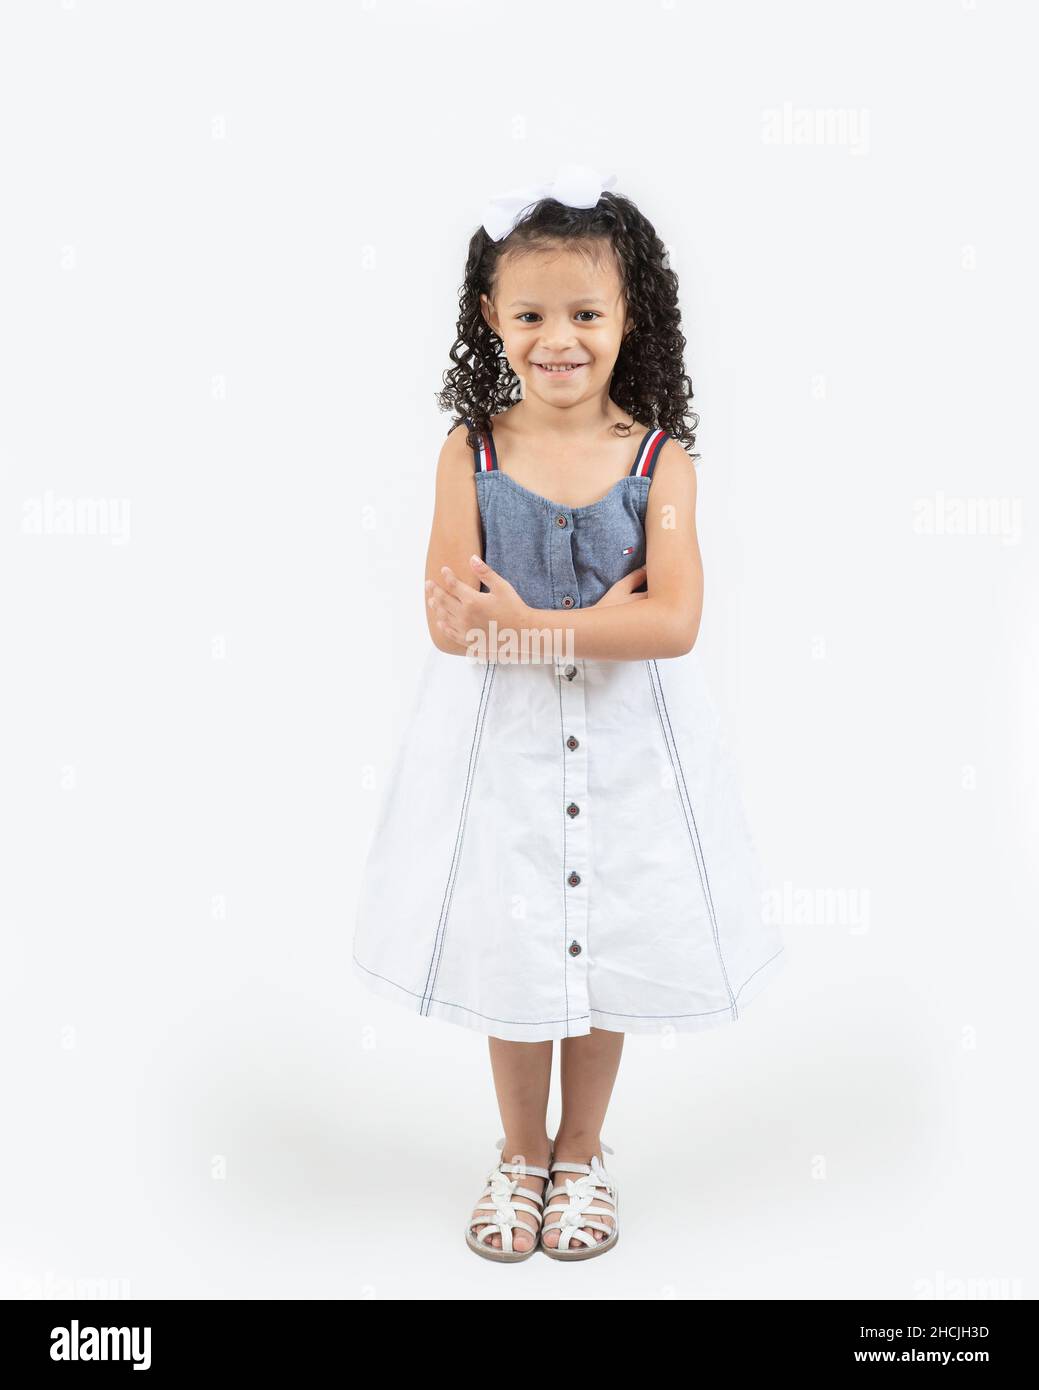 Closeup portrait of 4 year old girl, smiling, white background, full length Stock Photo